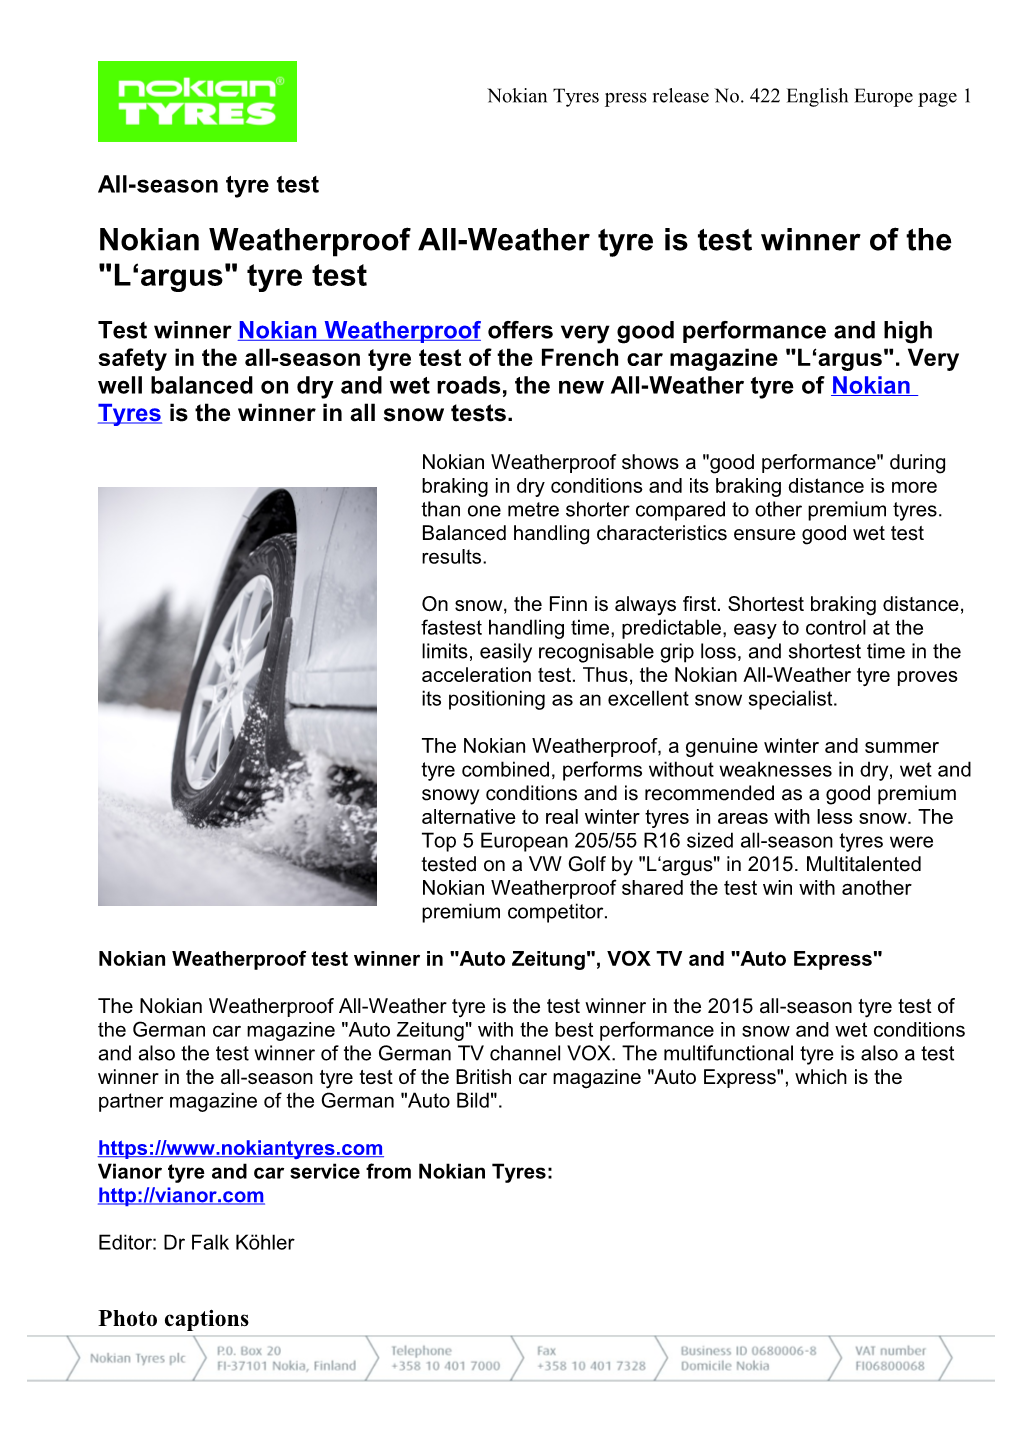 Nokian Tyres Press Release No. 422English Europe Page1